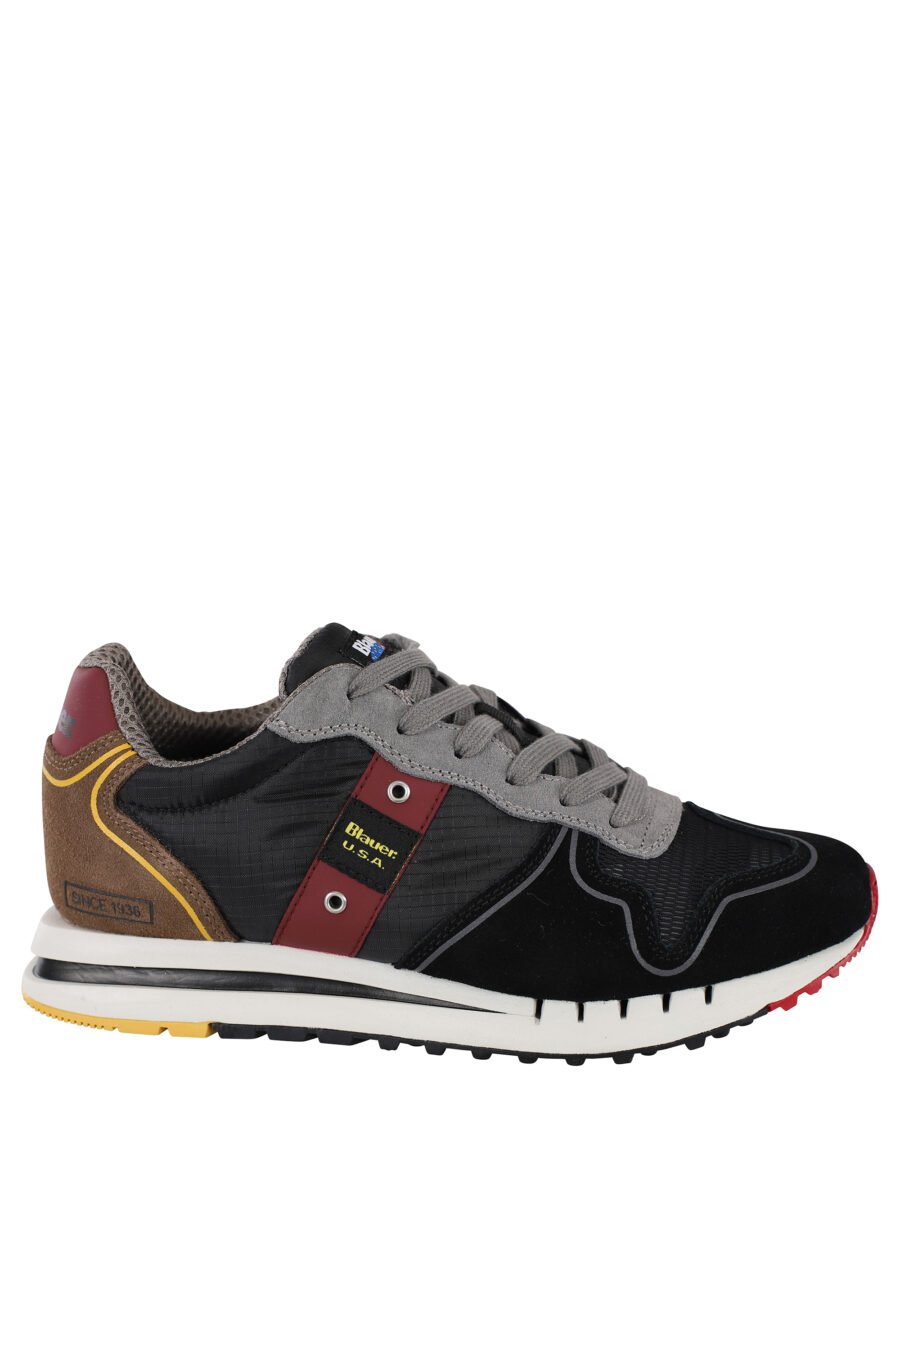 Trainers "quartz" black multicoloured with breathable mesh - IMG 6818